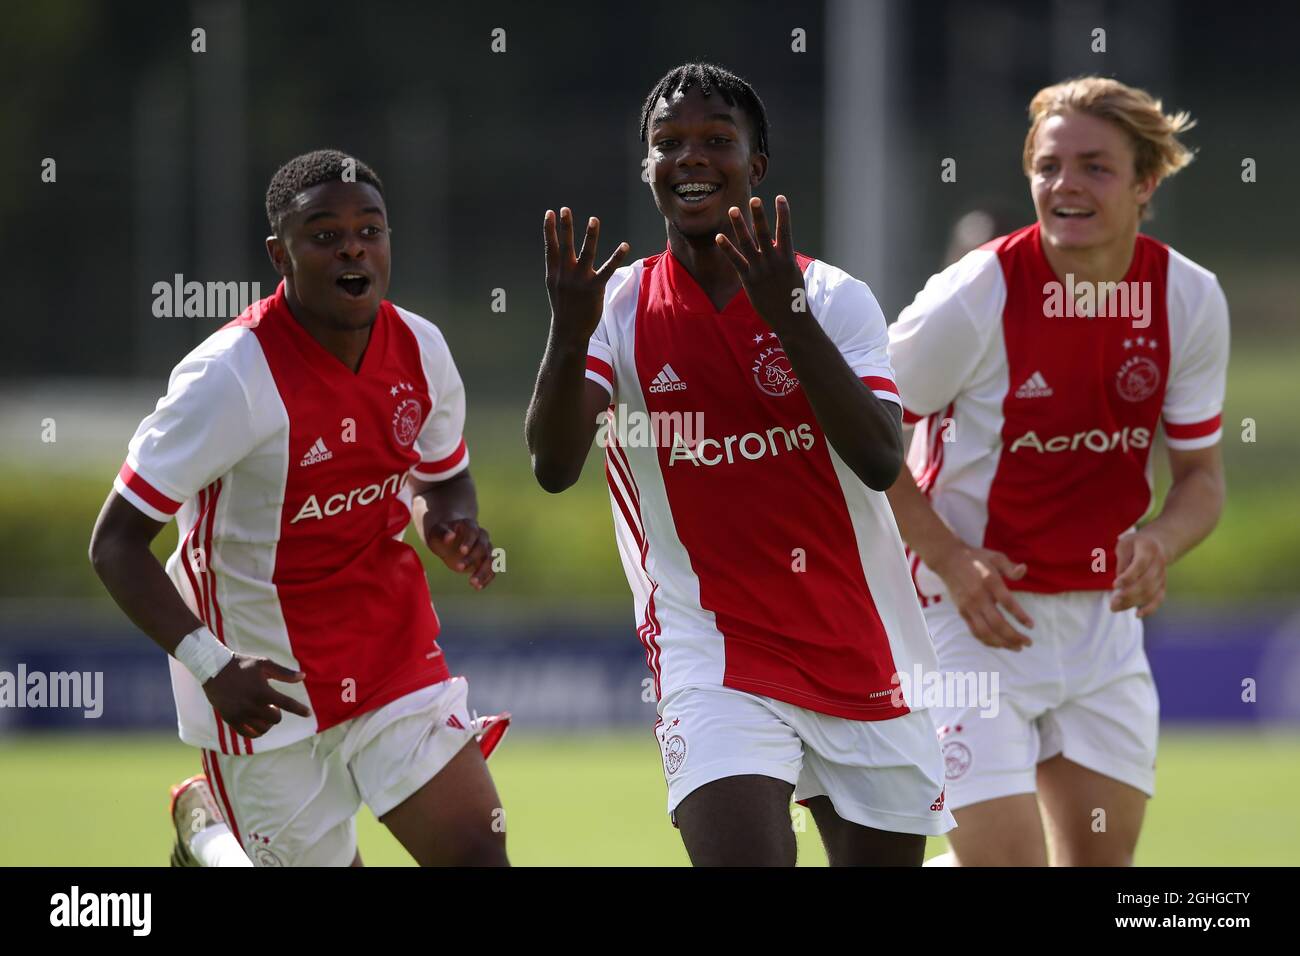 Joel Ideho of Ajax celebrates with team mates Sontje Hansen and Christian Rasmussen after scoring to give the side a 3-0 lead during the UEFA Youth League match at Colovray Sports Centre, Nyon. Picture date: 18th August 2020. Picture credit should read: Jonathan Moscrop/Sportimage via PA Images Stock Photo